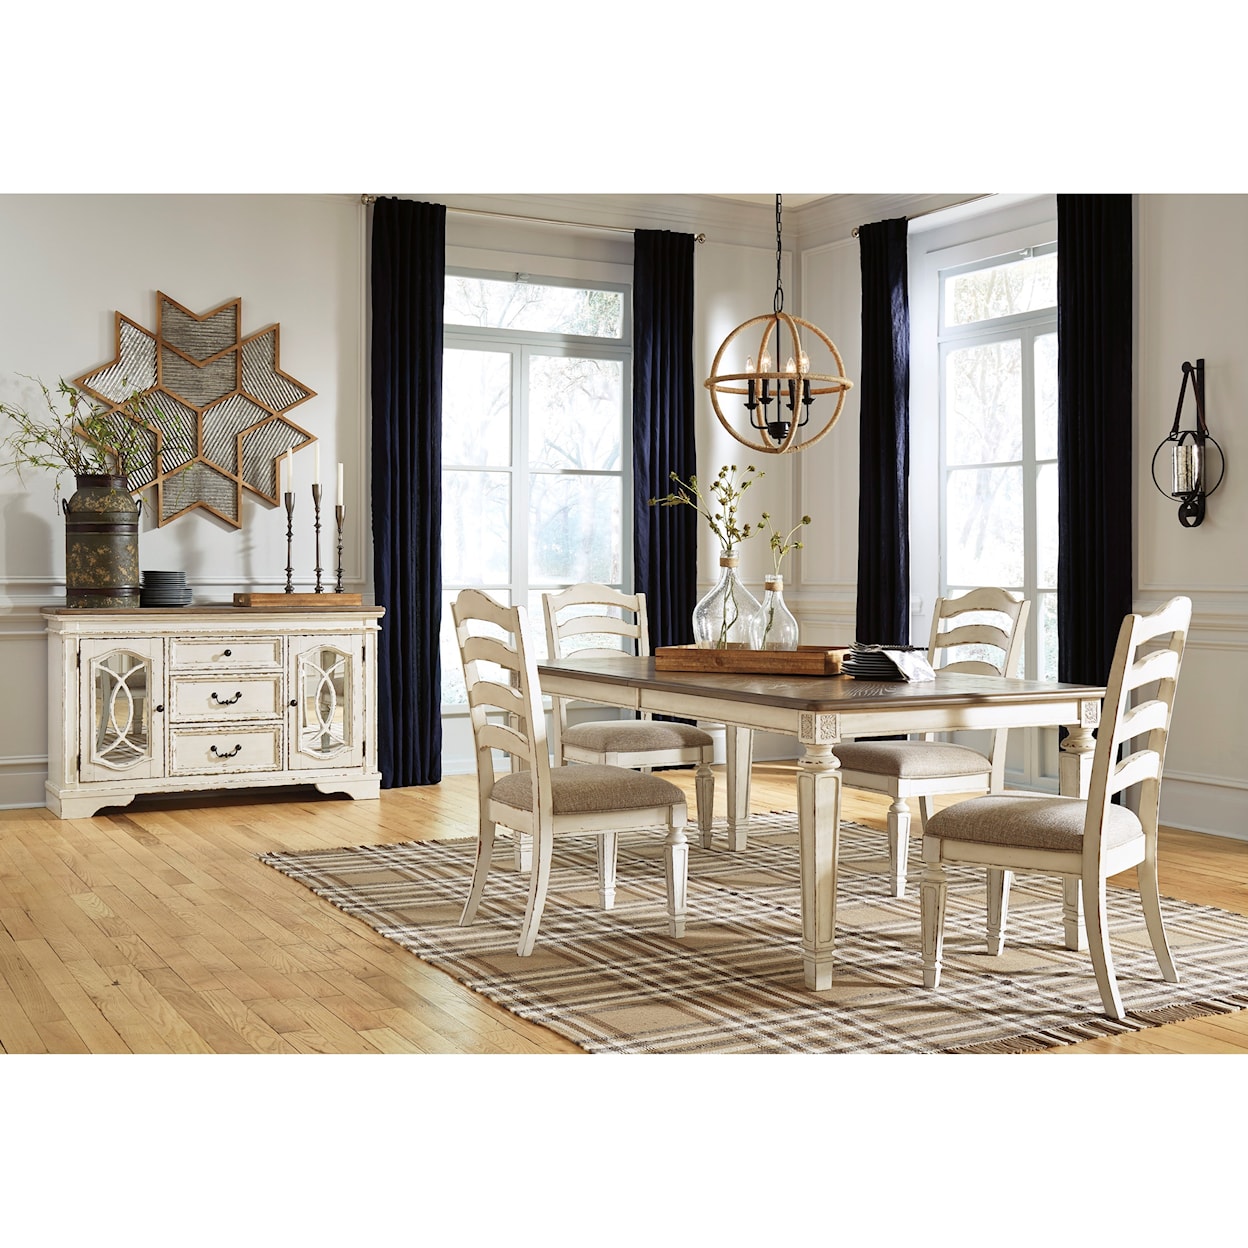 Signature Design by Ashley Realyn Casual Dining Room Group